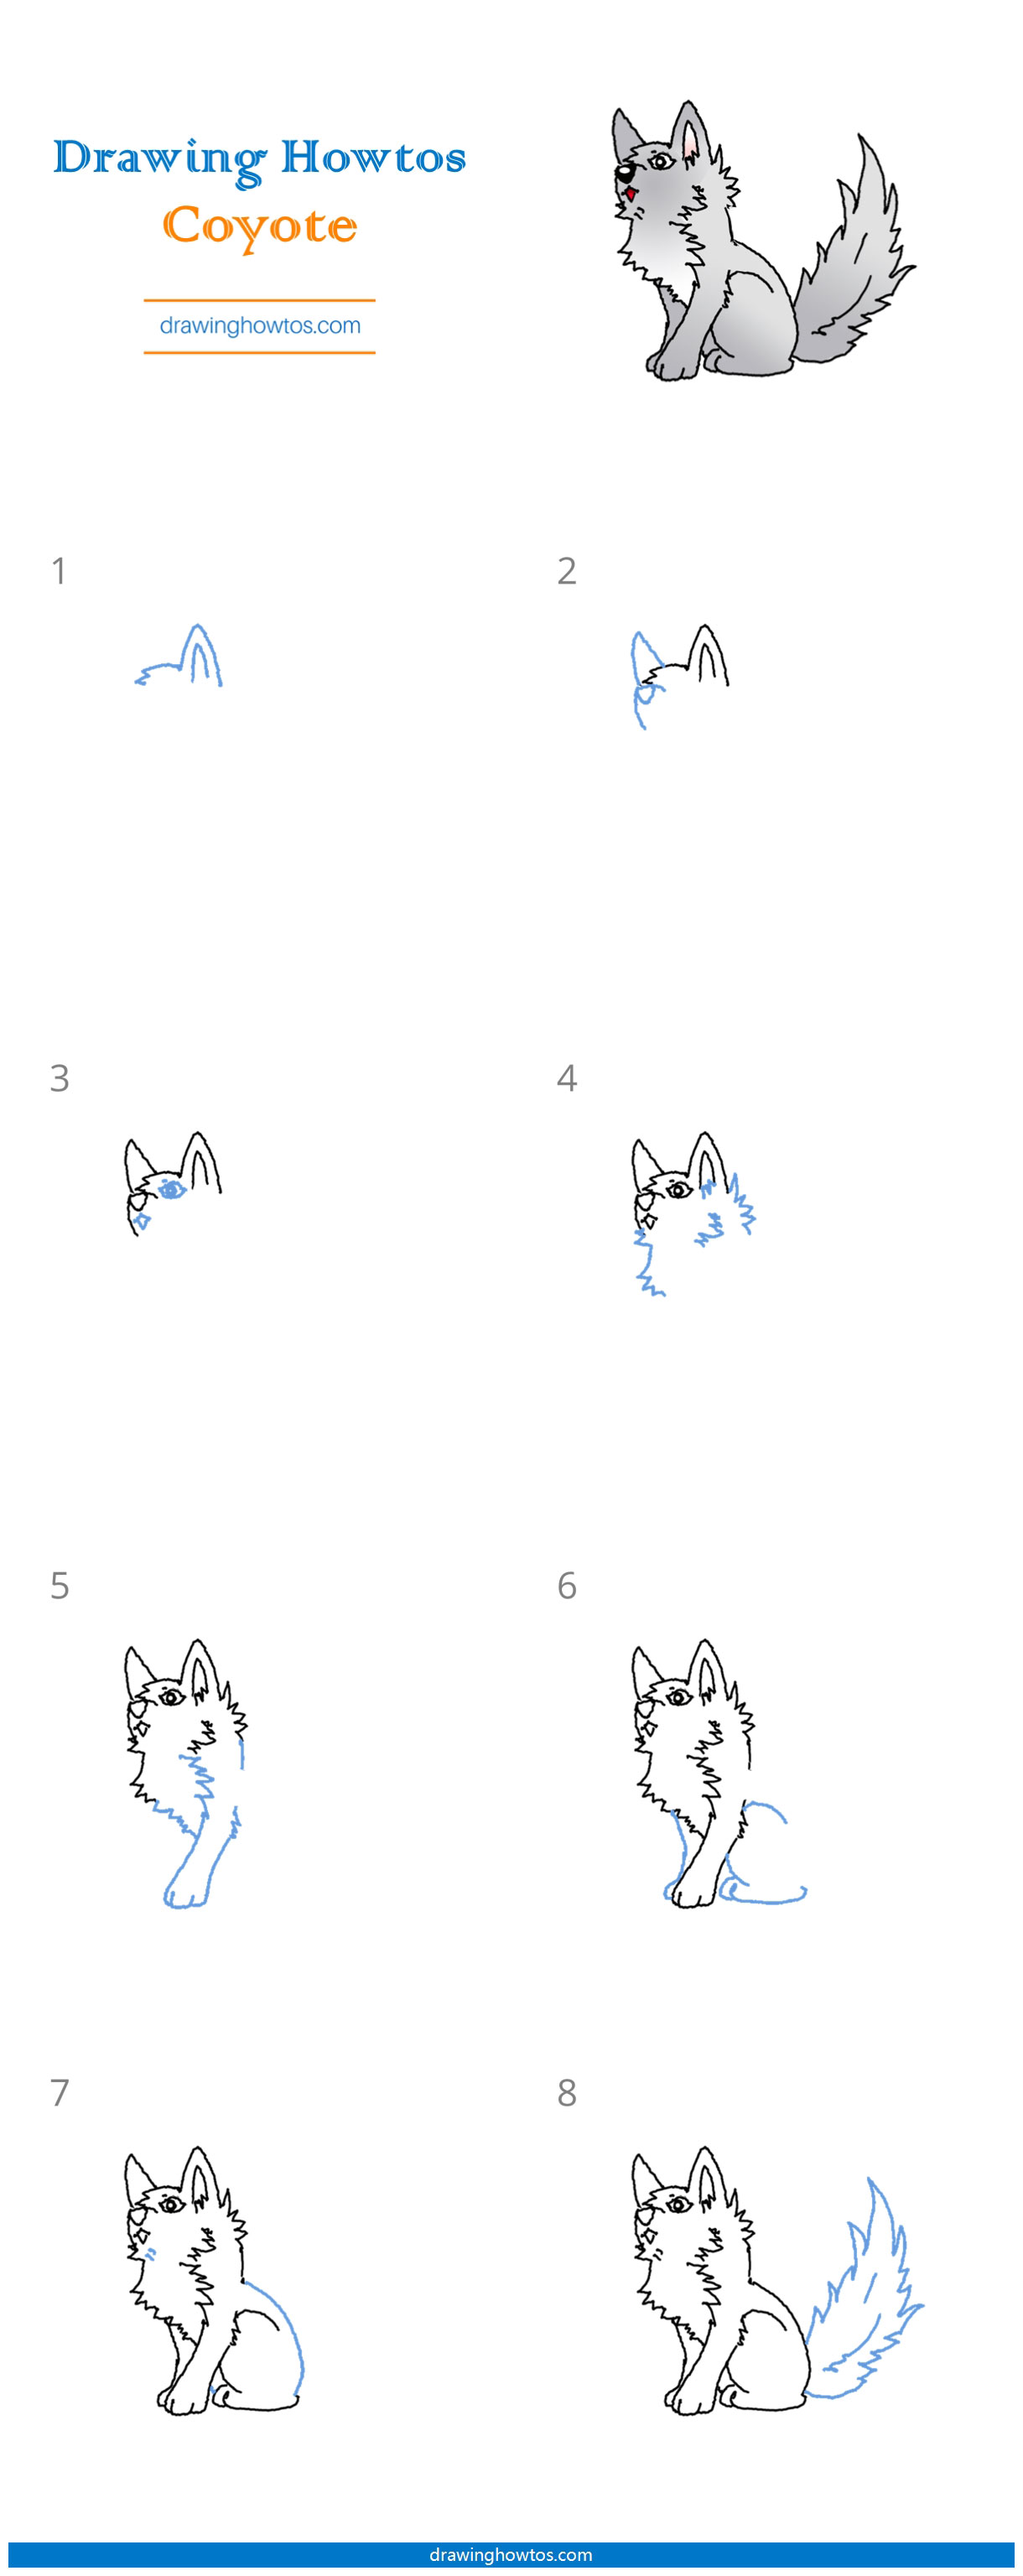 How to Draw a Coyote Step by Step